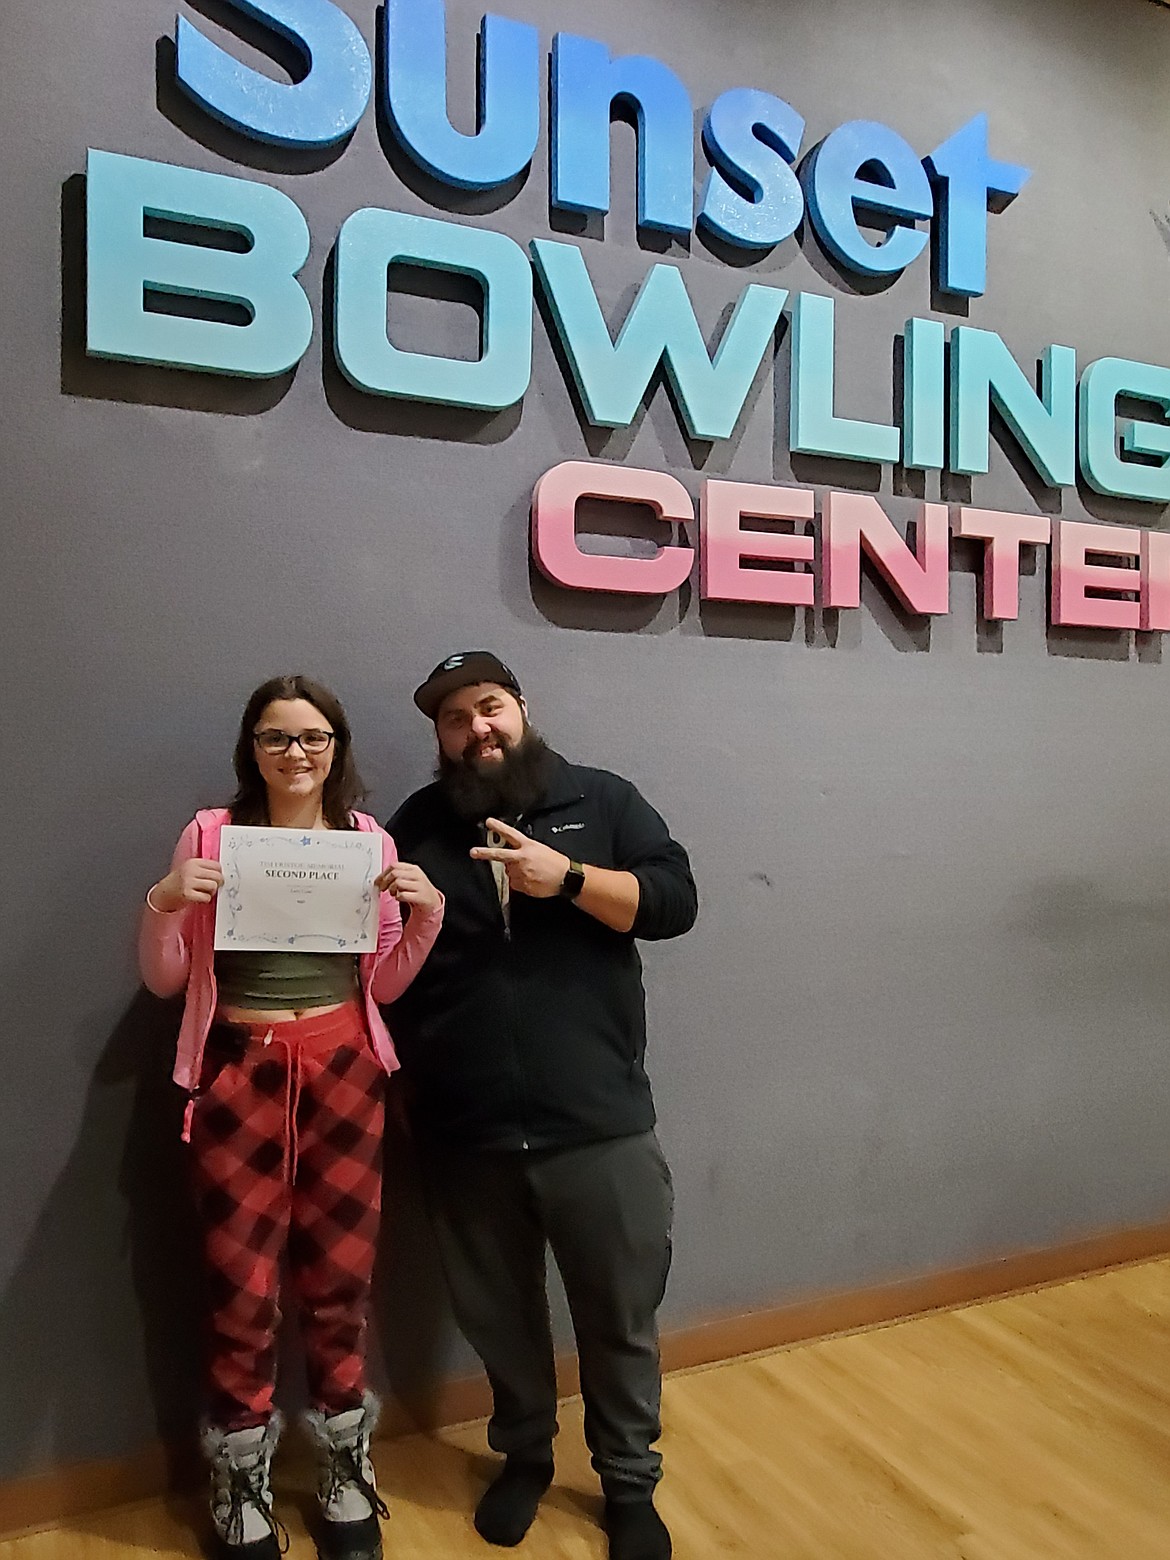 Courtesy photo
The 7th annual Tim Fristoe Youth/Adult Tournament was held Sunday at Sunset Bowling Center in Coeur d'Alene. Second place went to Lexi Goss, left, and Troy Meyers. Goss earned a $90 scholarship.